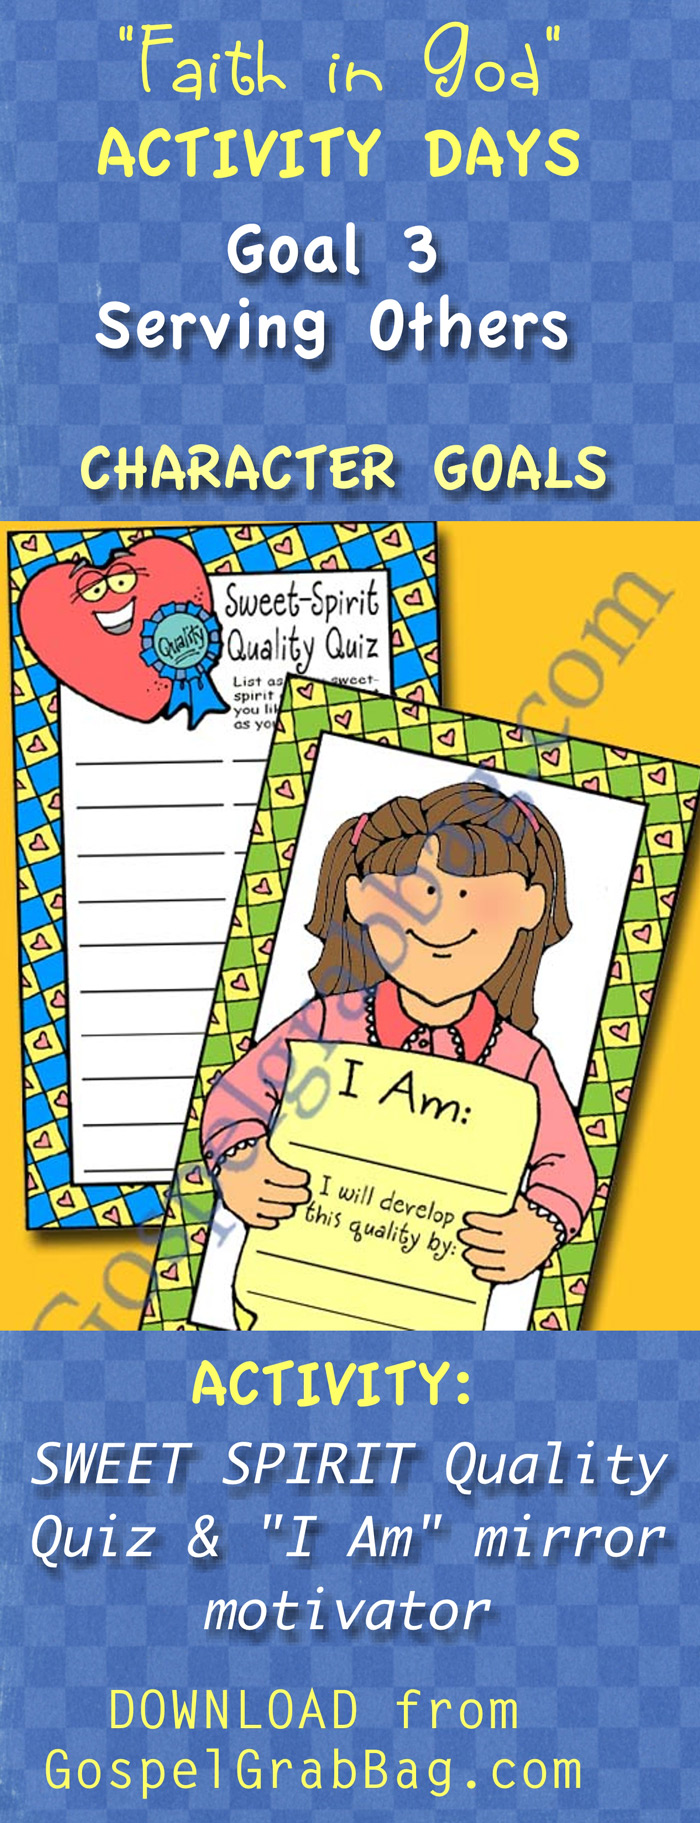 Character, Service: LDS Lesson Activity - Activity Days ...